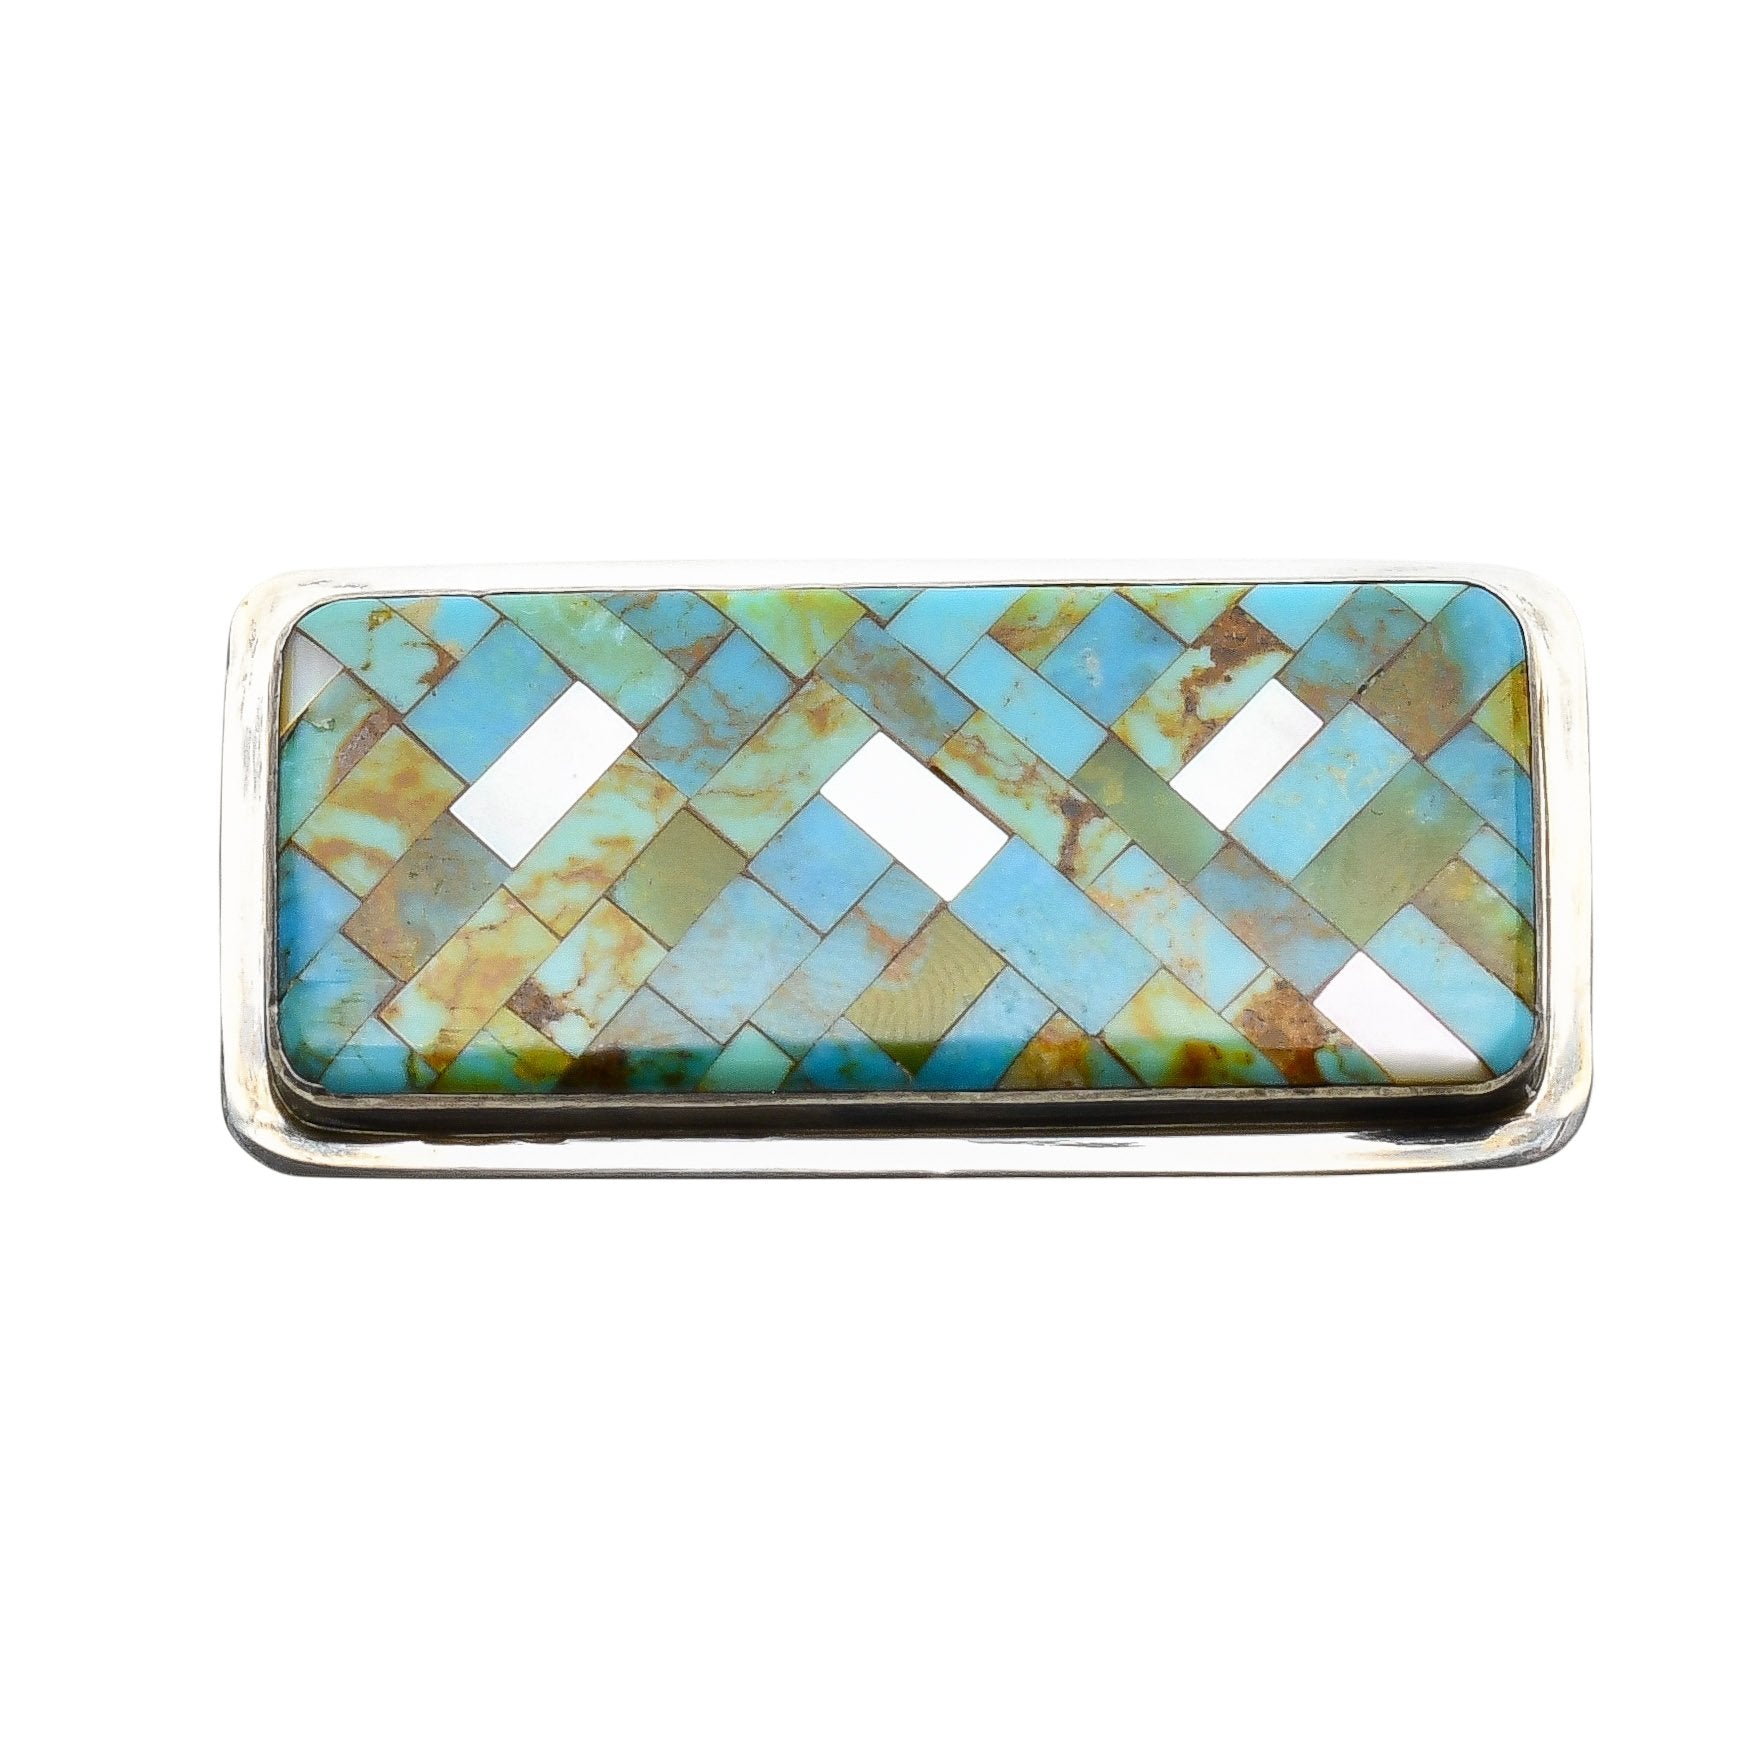 Charlie Bird Pin of Mosaic Inlay Turquoise and Mother of Pearl - Turquoise & Tufa